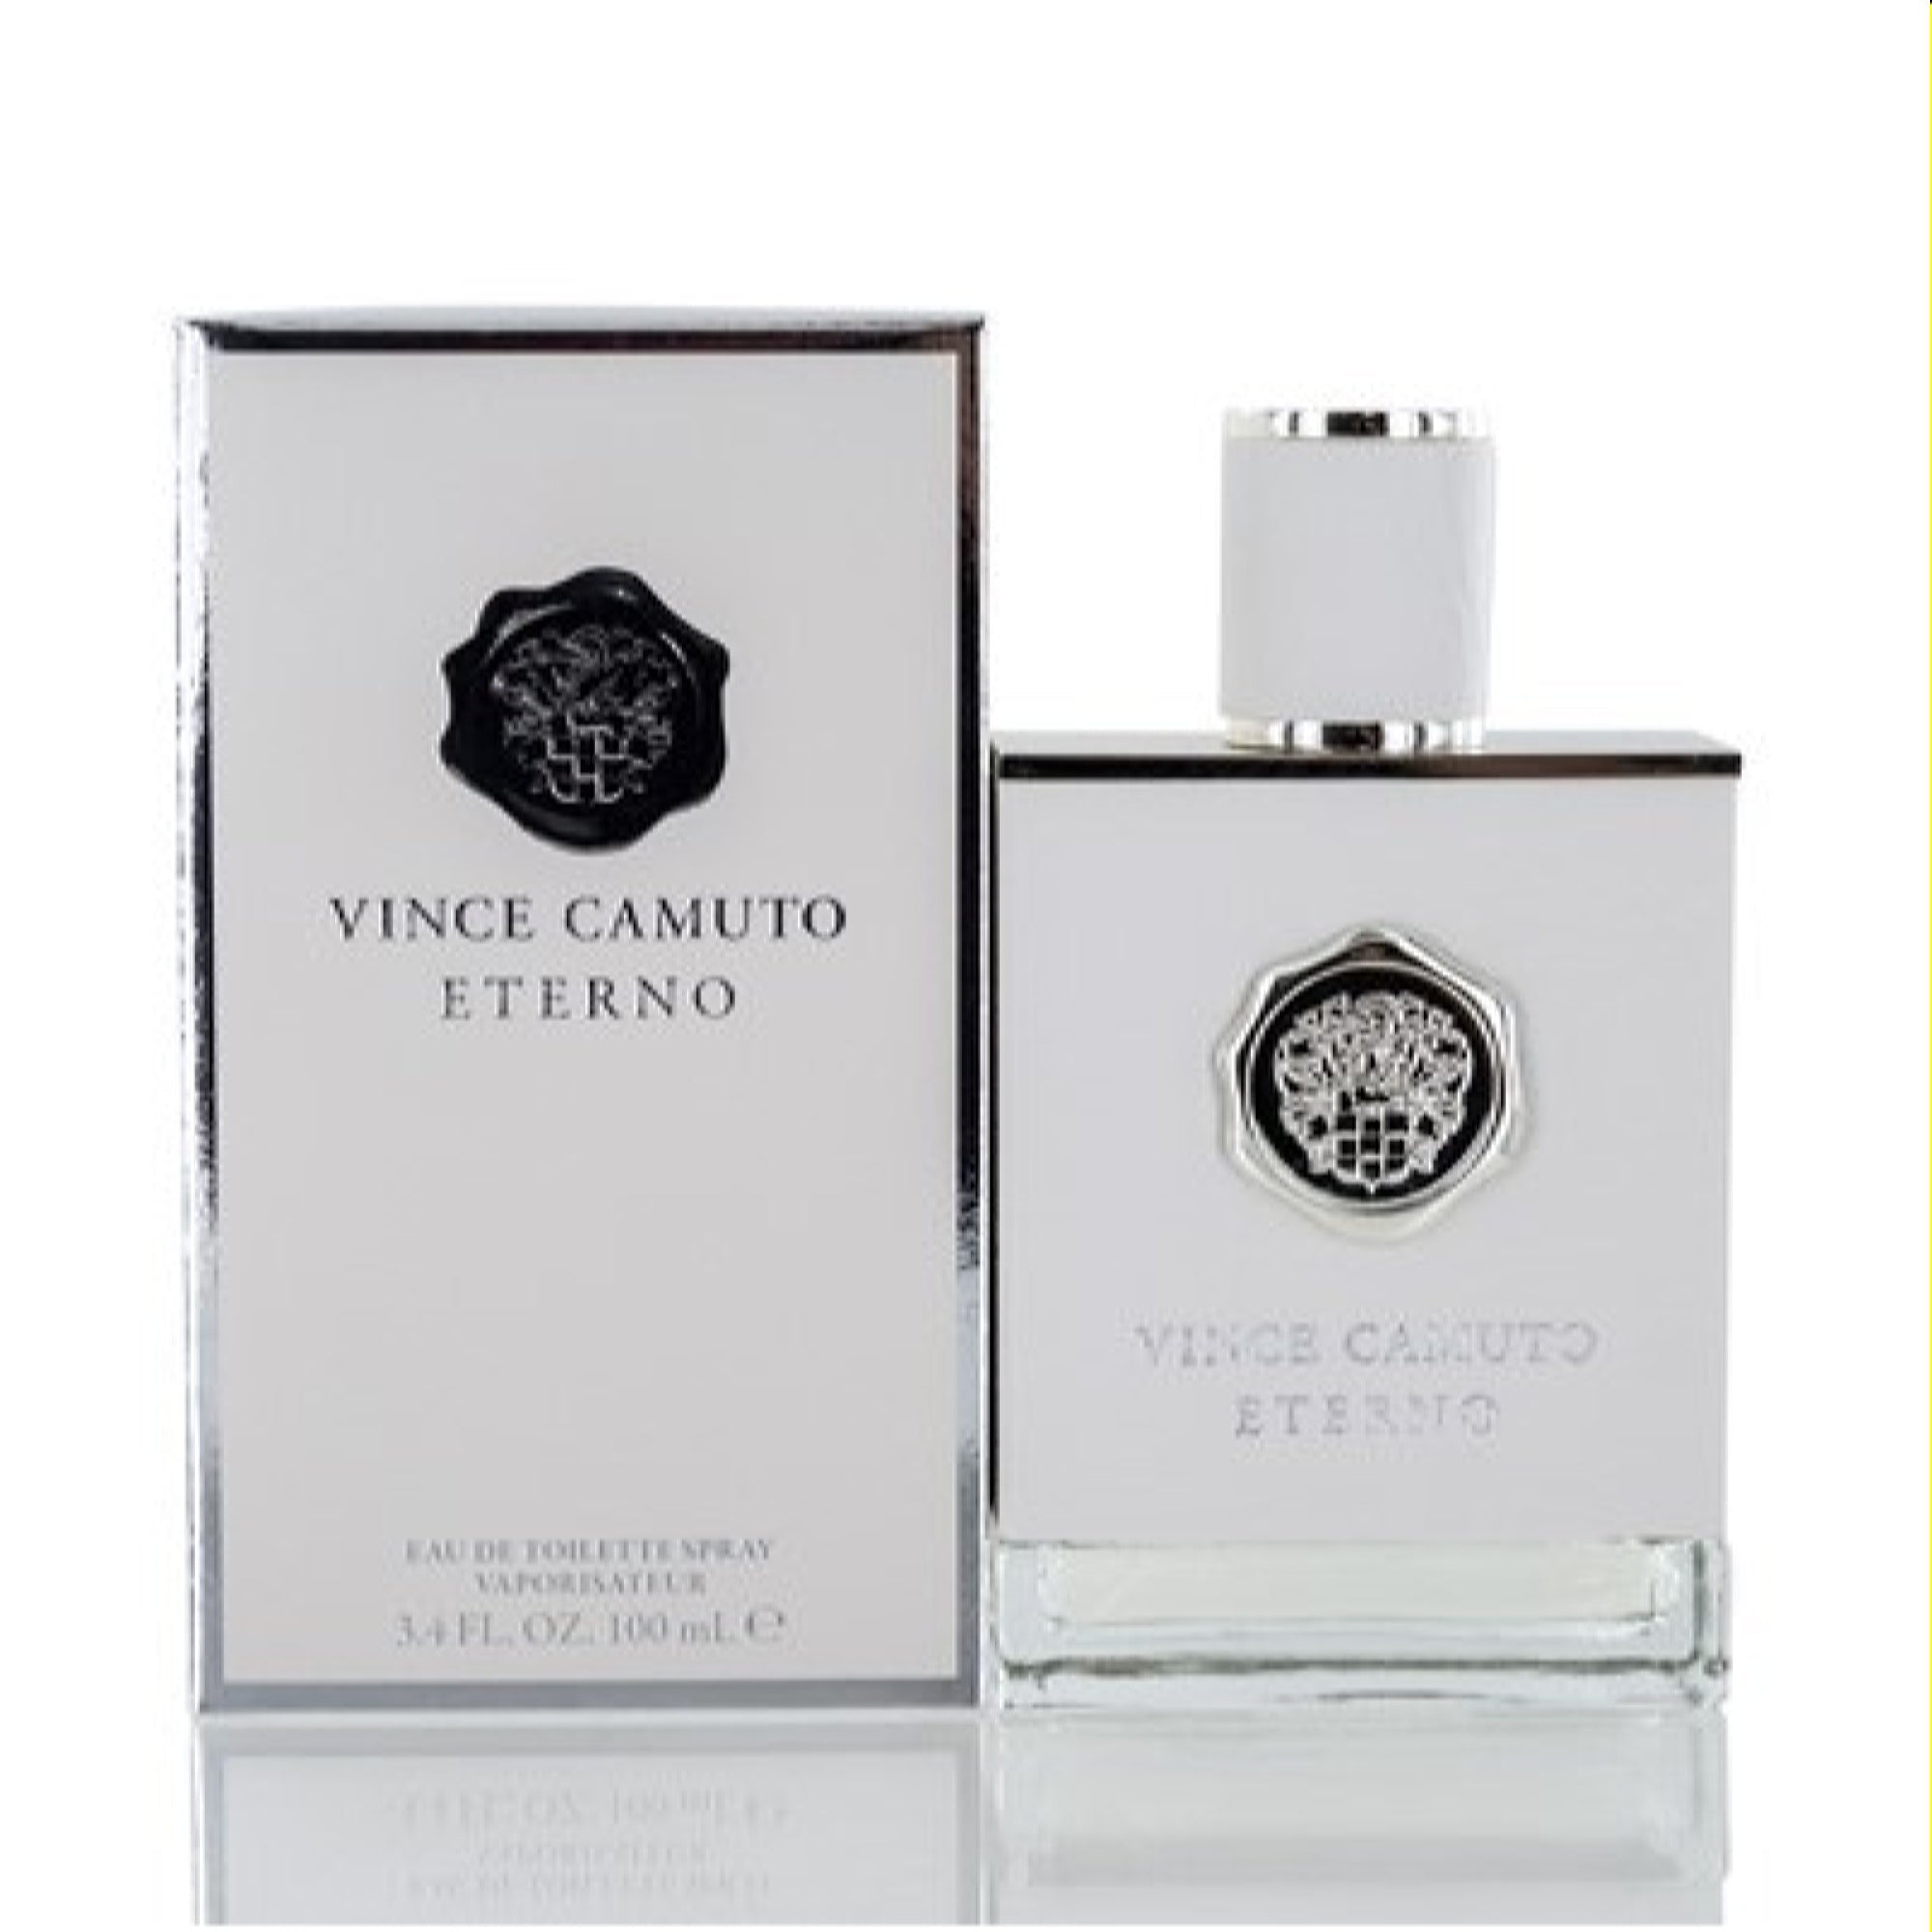 Vince Camuto Men's Vince Camuto Eterno Vince Camuto Edt Spray 3.4 Oz (100 Ml)  608940565971